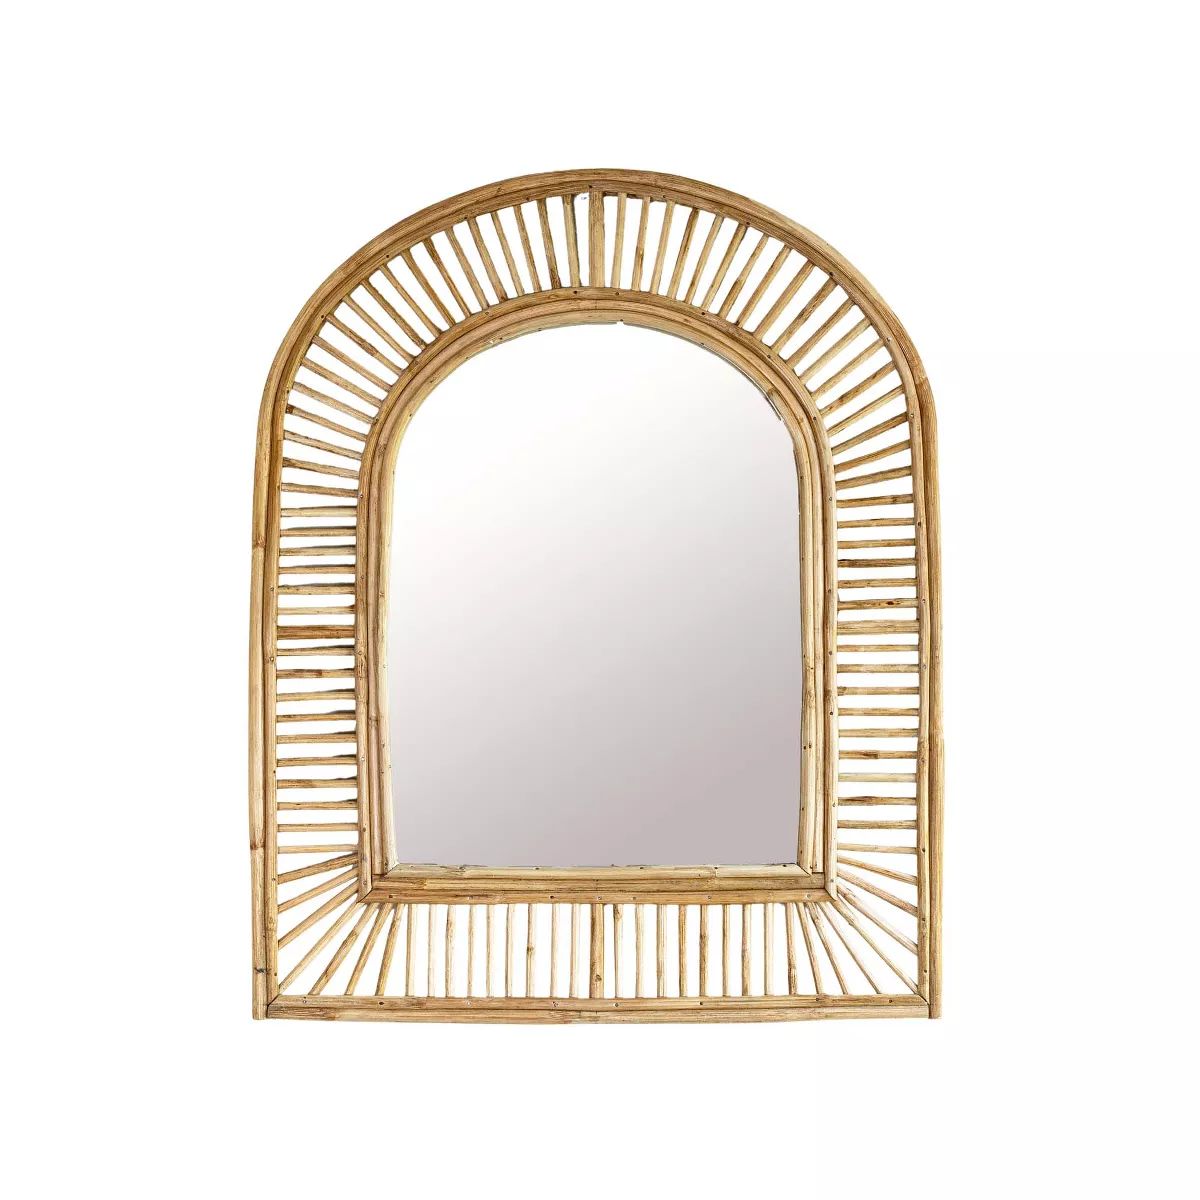 Arched Cane Wall Mirror Natural Cane & Glass by Foreside Home & Garden | Target